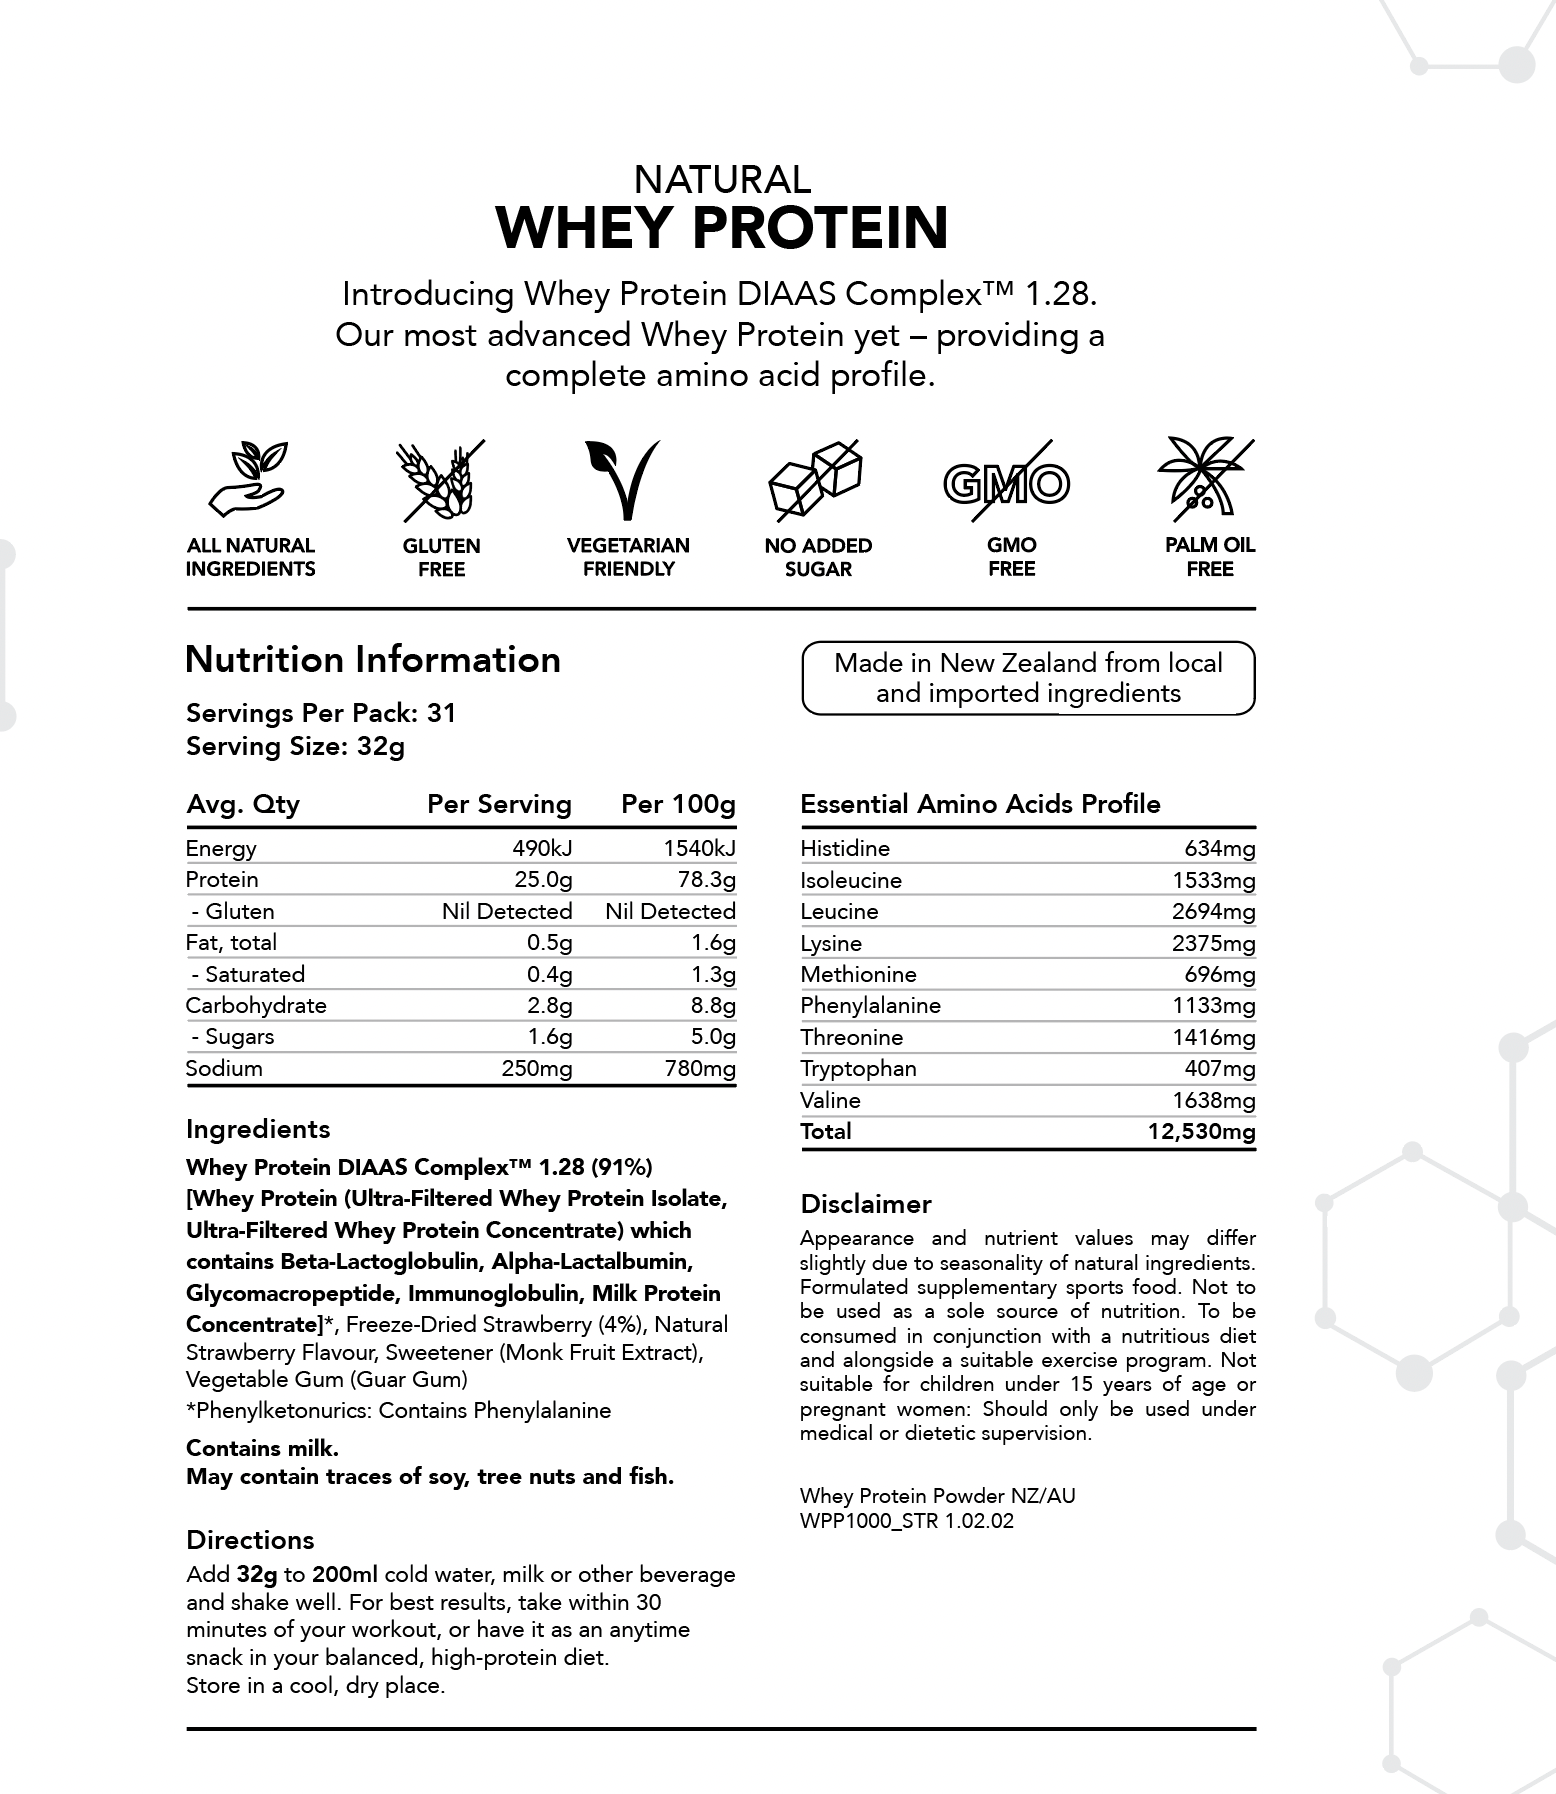 Radix Nutrition - Whey Protein DIAAS Complex™ 1.61 in strawberry flavour